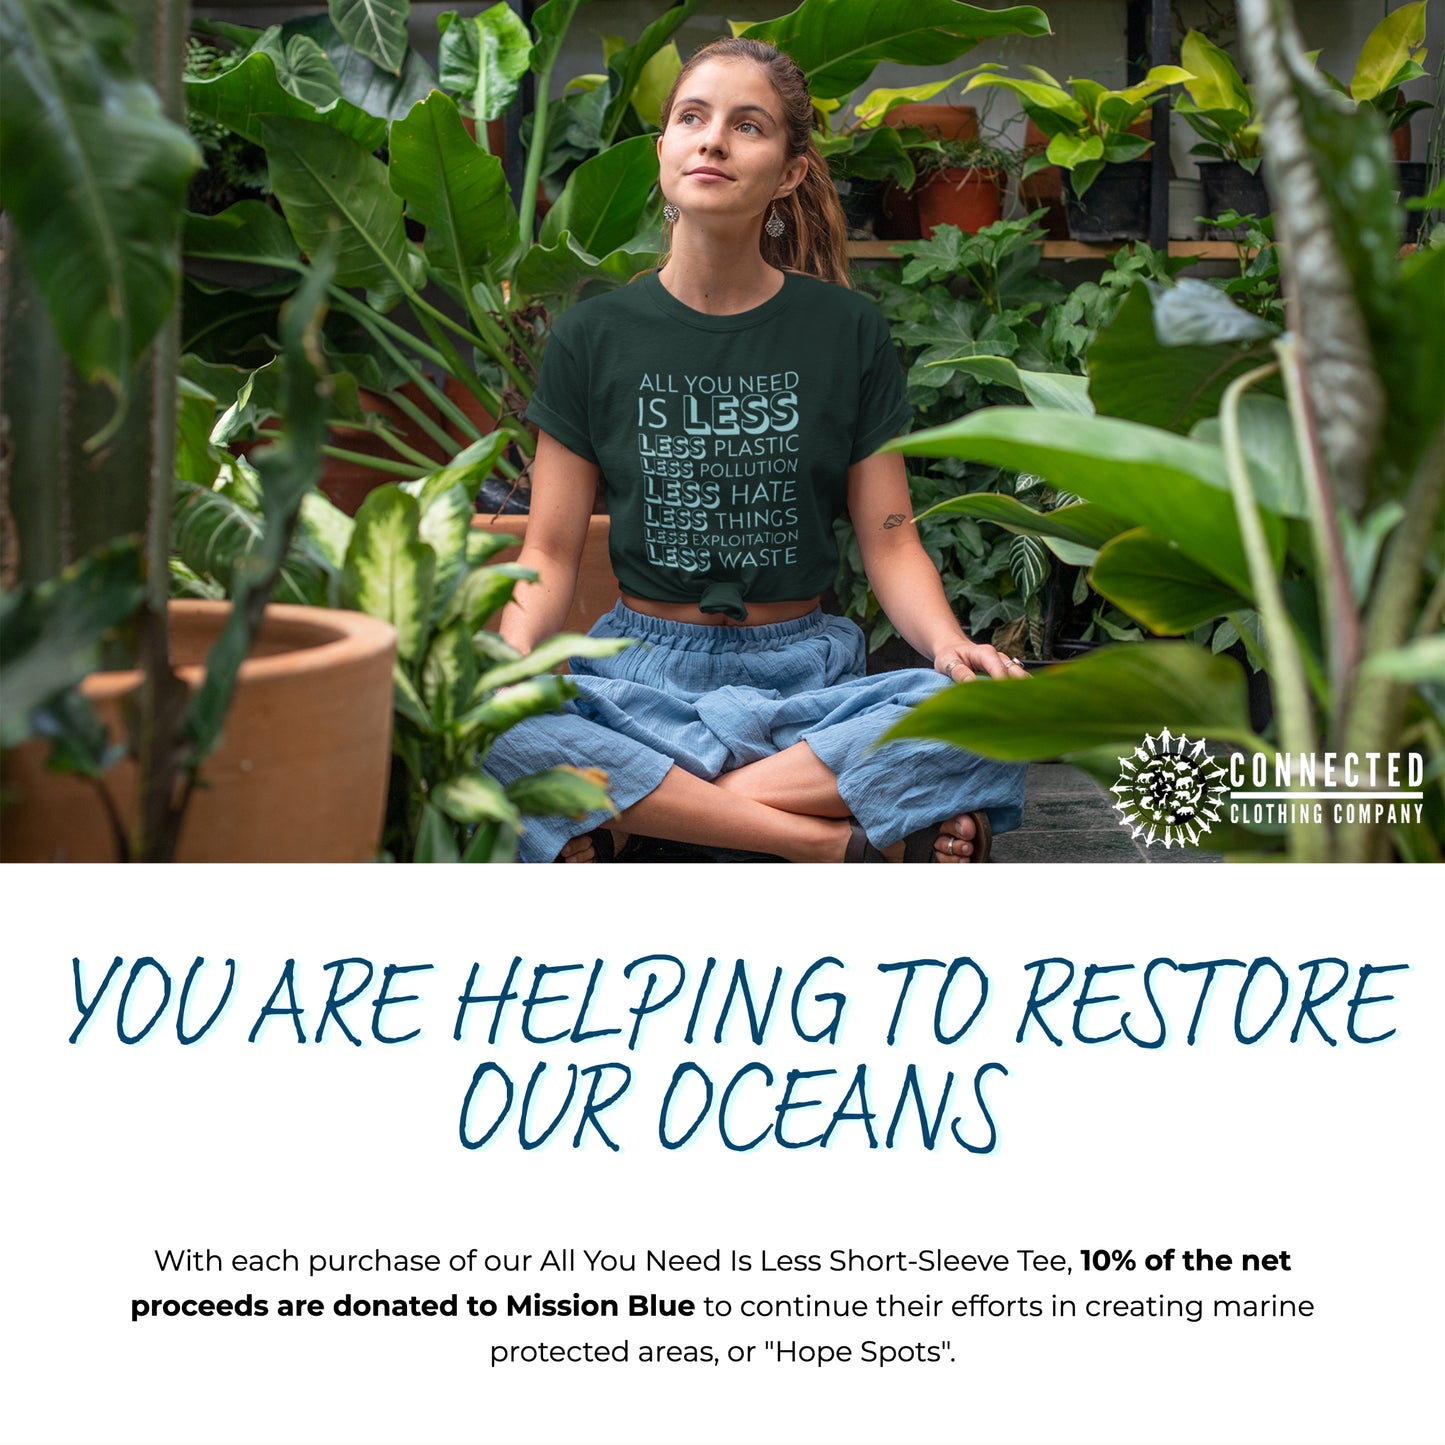 You are helping to restore our oceans. With every purchase of our All You Need Is Less Tee, 10% of the net proceeds are donated to Mission Blue to continue their efforts in creating marine protected areas, or "Hope Spots"